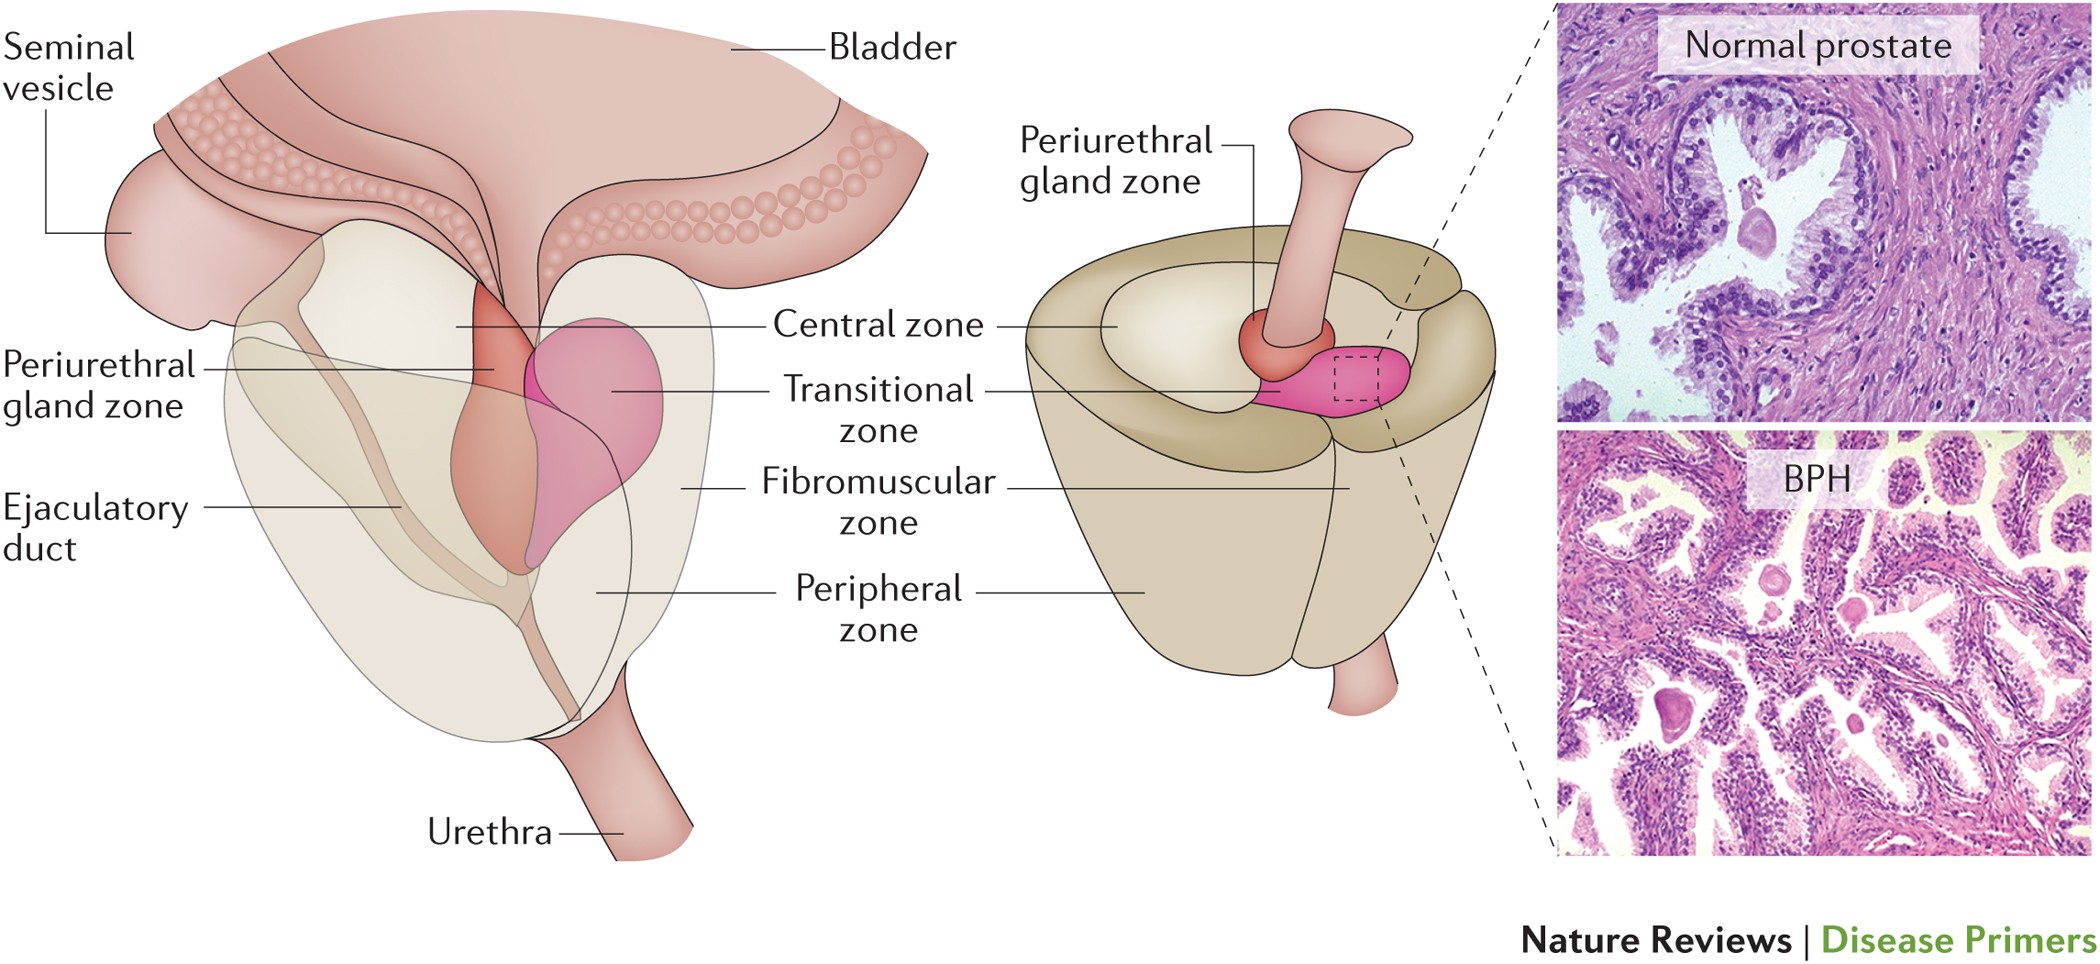 prostate adenoma signs and symptoms)